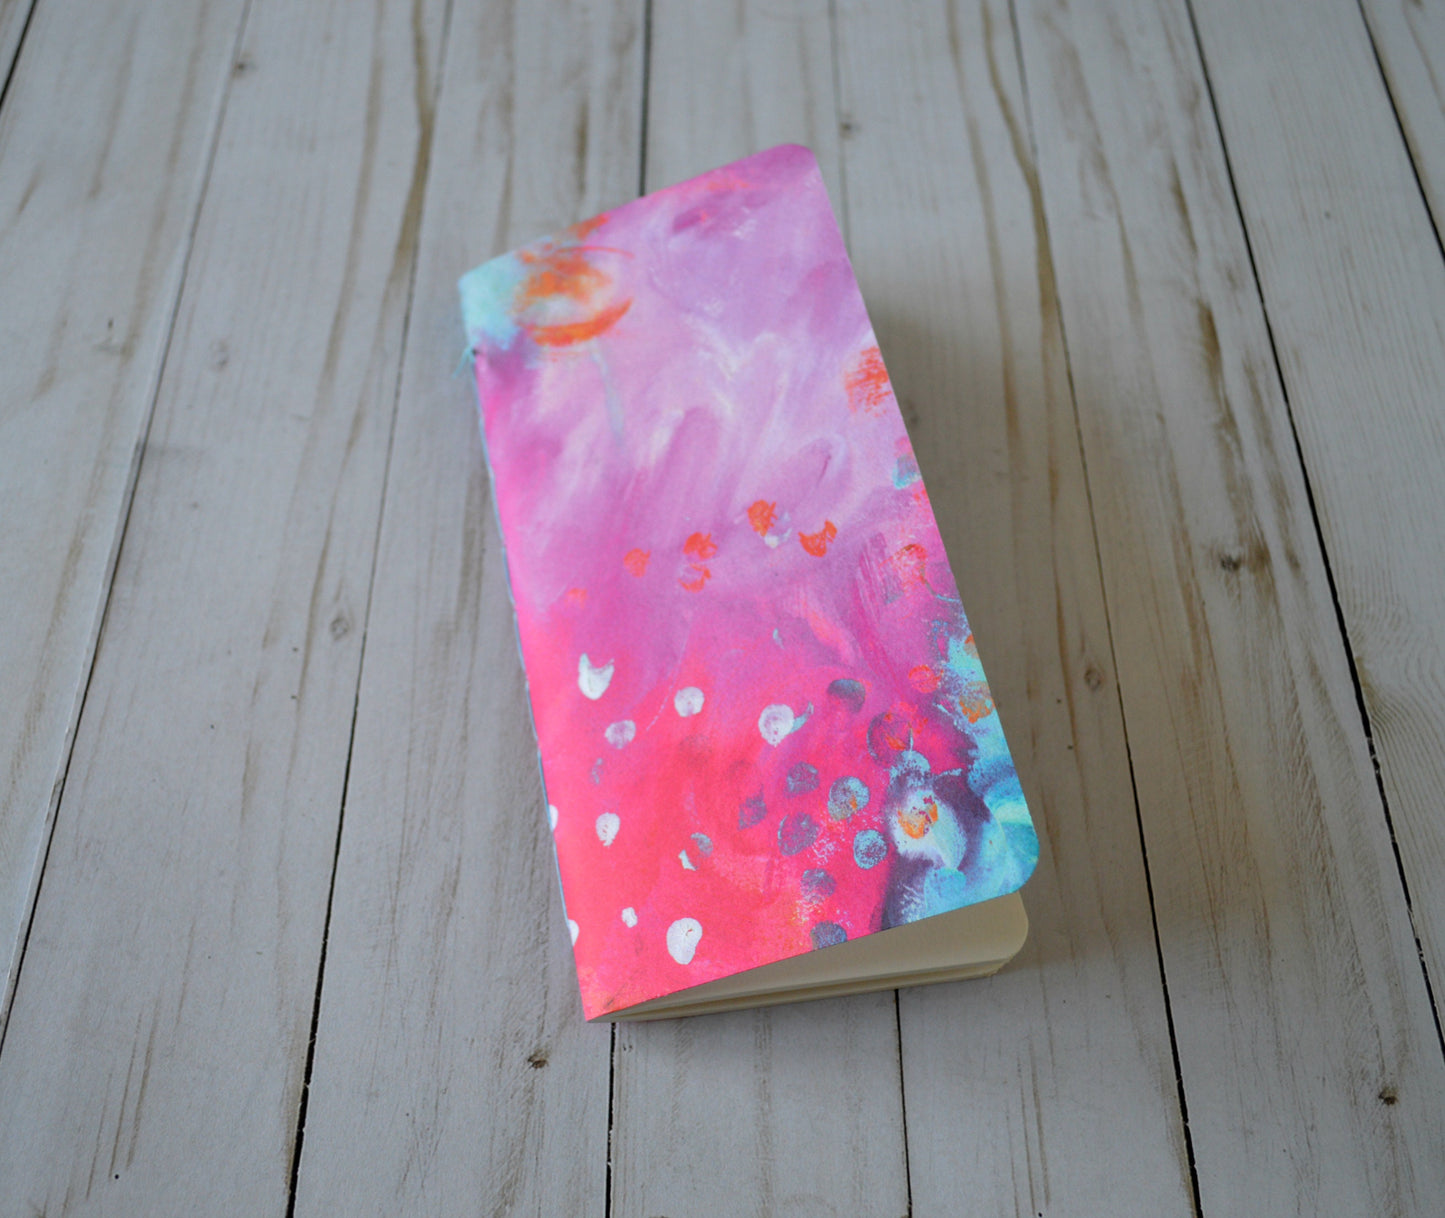 Travelers notebook journal refill with watercolor paper, artist pocket sketchbook midori insert, happy gift for creative